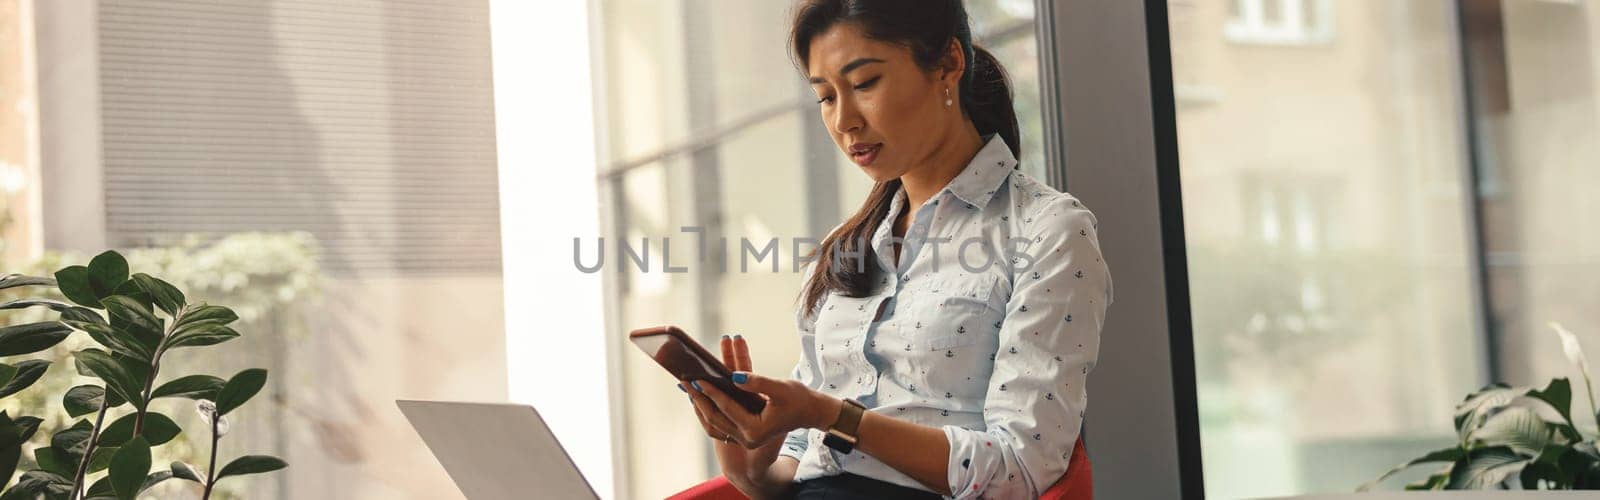 Woman entrepreneur looking on phone while working on laptop in office